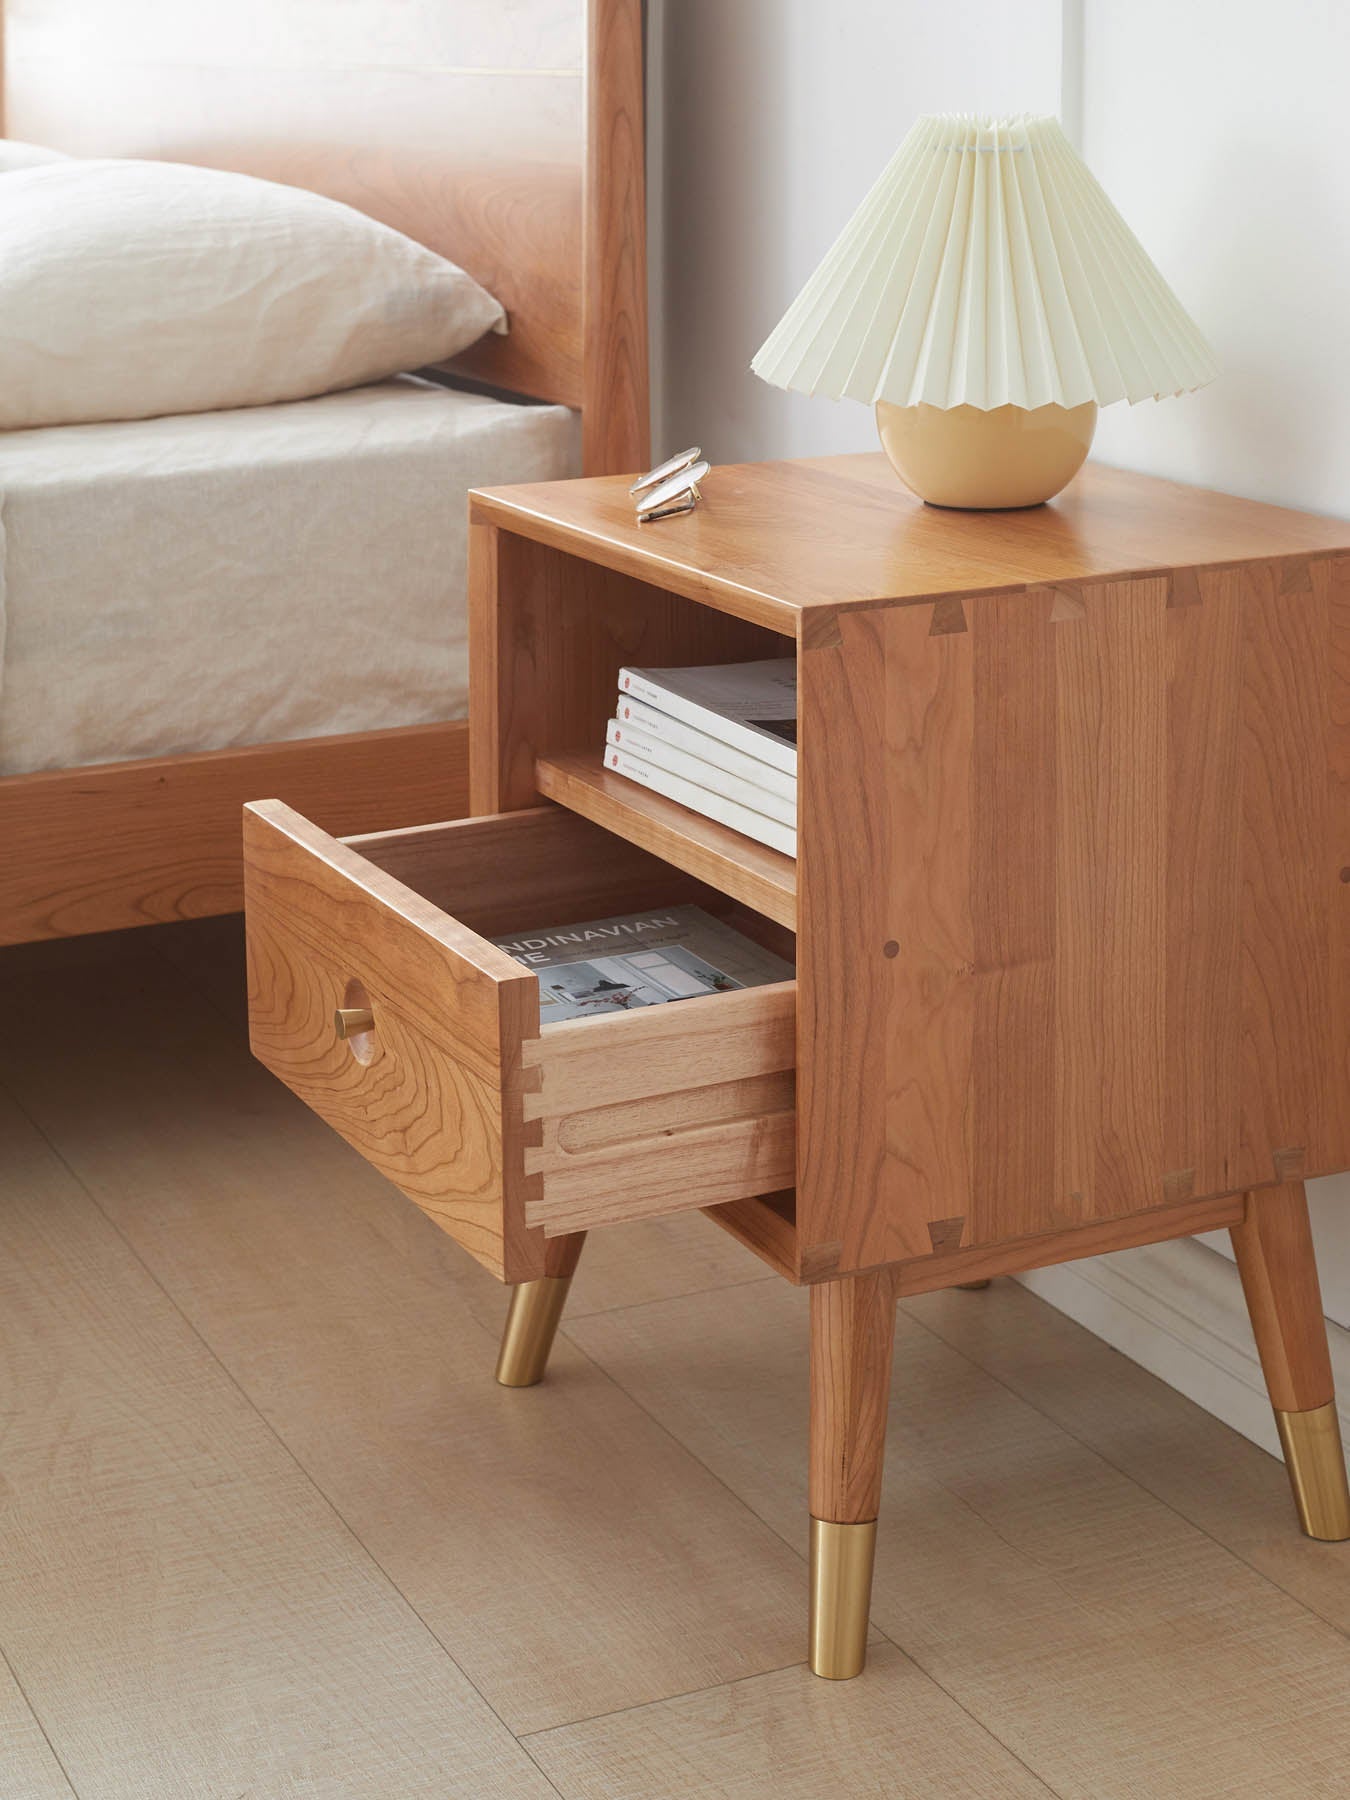 Set of 2 Clayton Cherry Wood Bedside Table